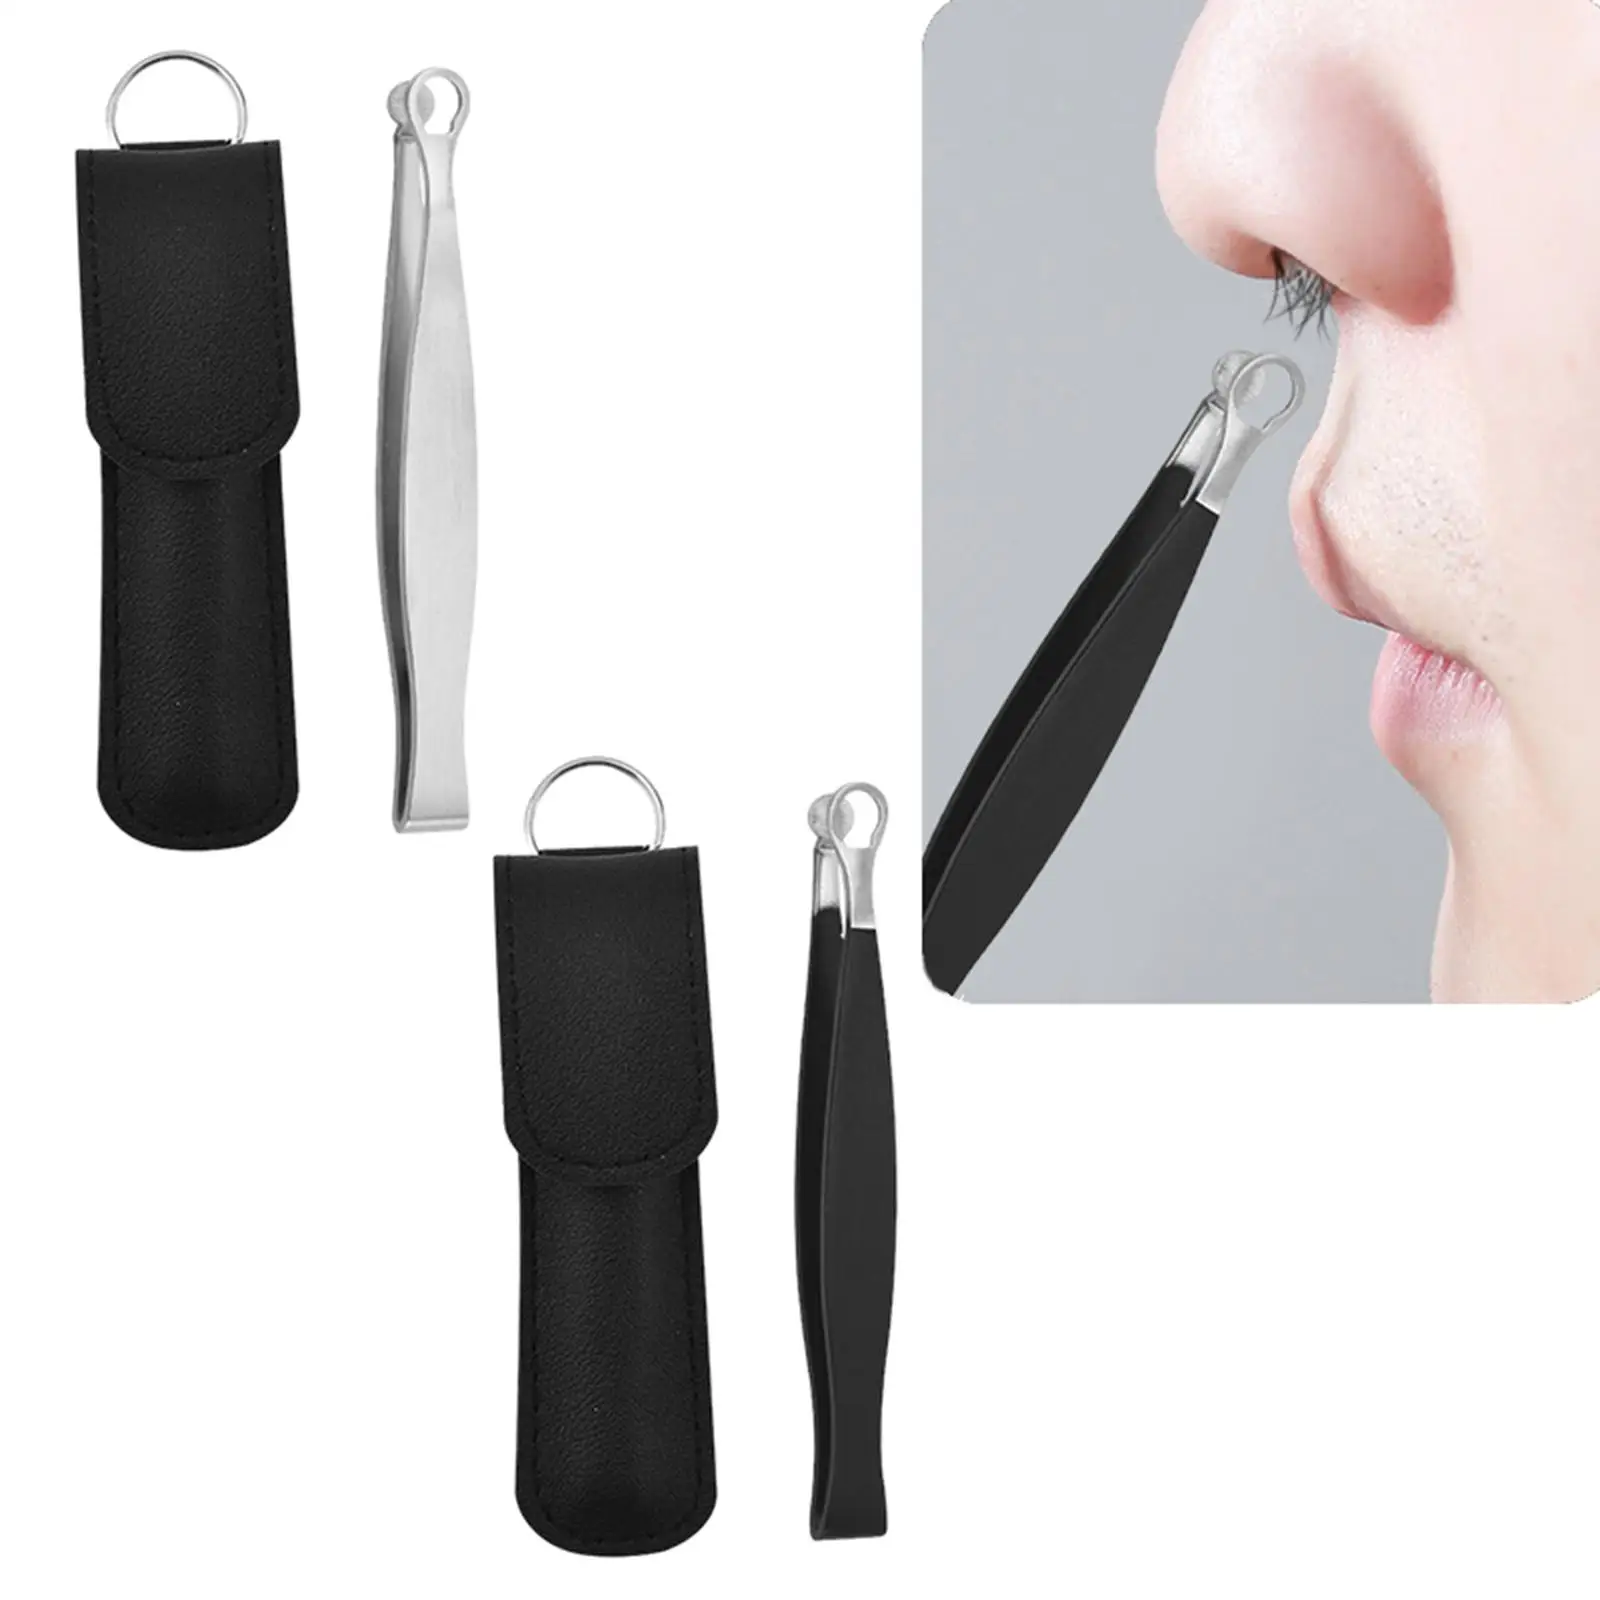 Nose Hair Tweezers Round Head Travel Size W/ PU Carrying Case Eyebrow Tweezers for Nose Cleaning Nose Trimming Body Women Men